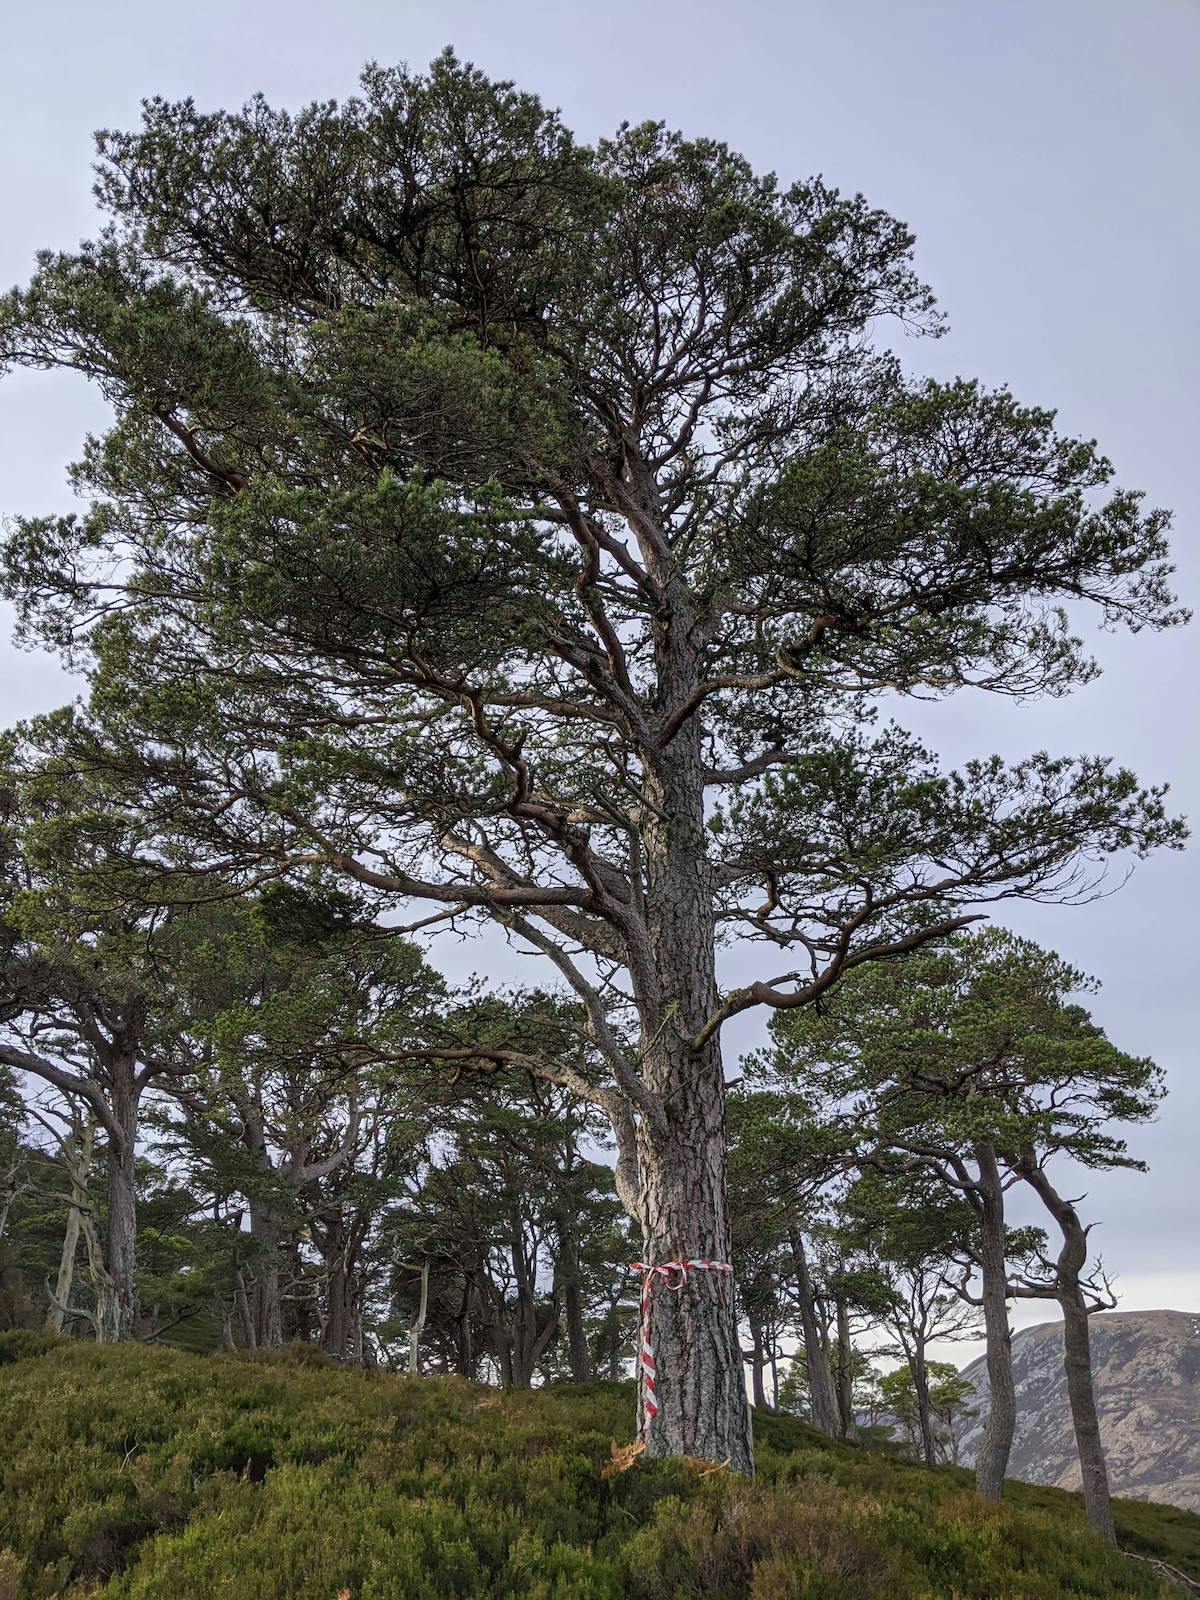 A red and white tape wraps around a tall scots pine. This Scots pine was chosen as the site of the white-tailed eagle nest platform